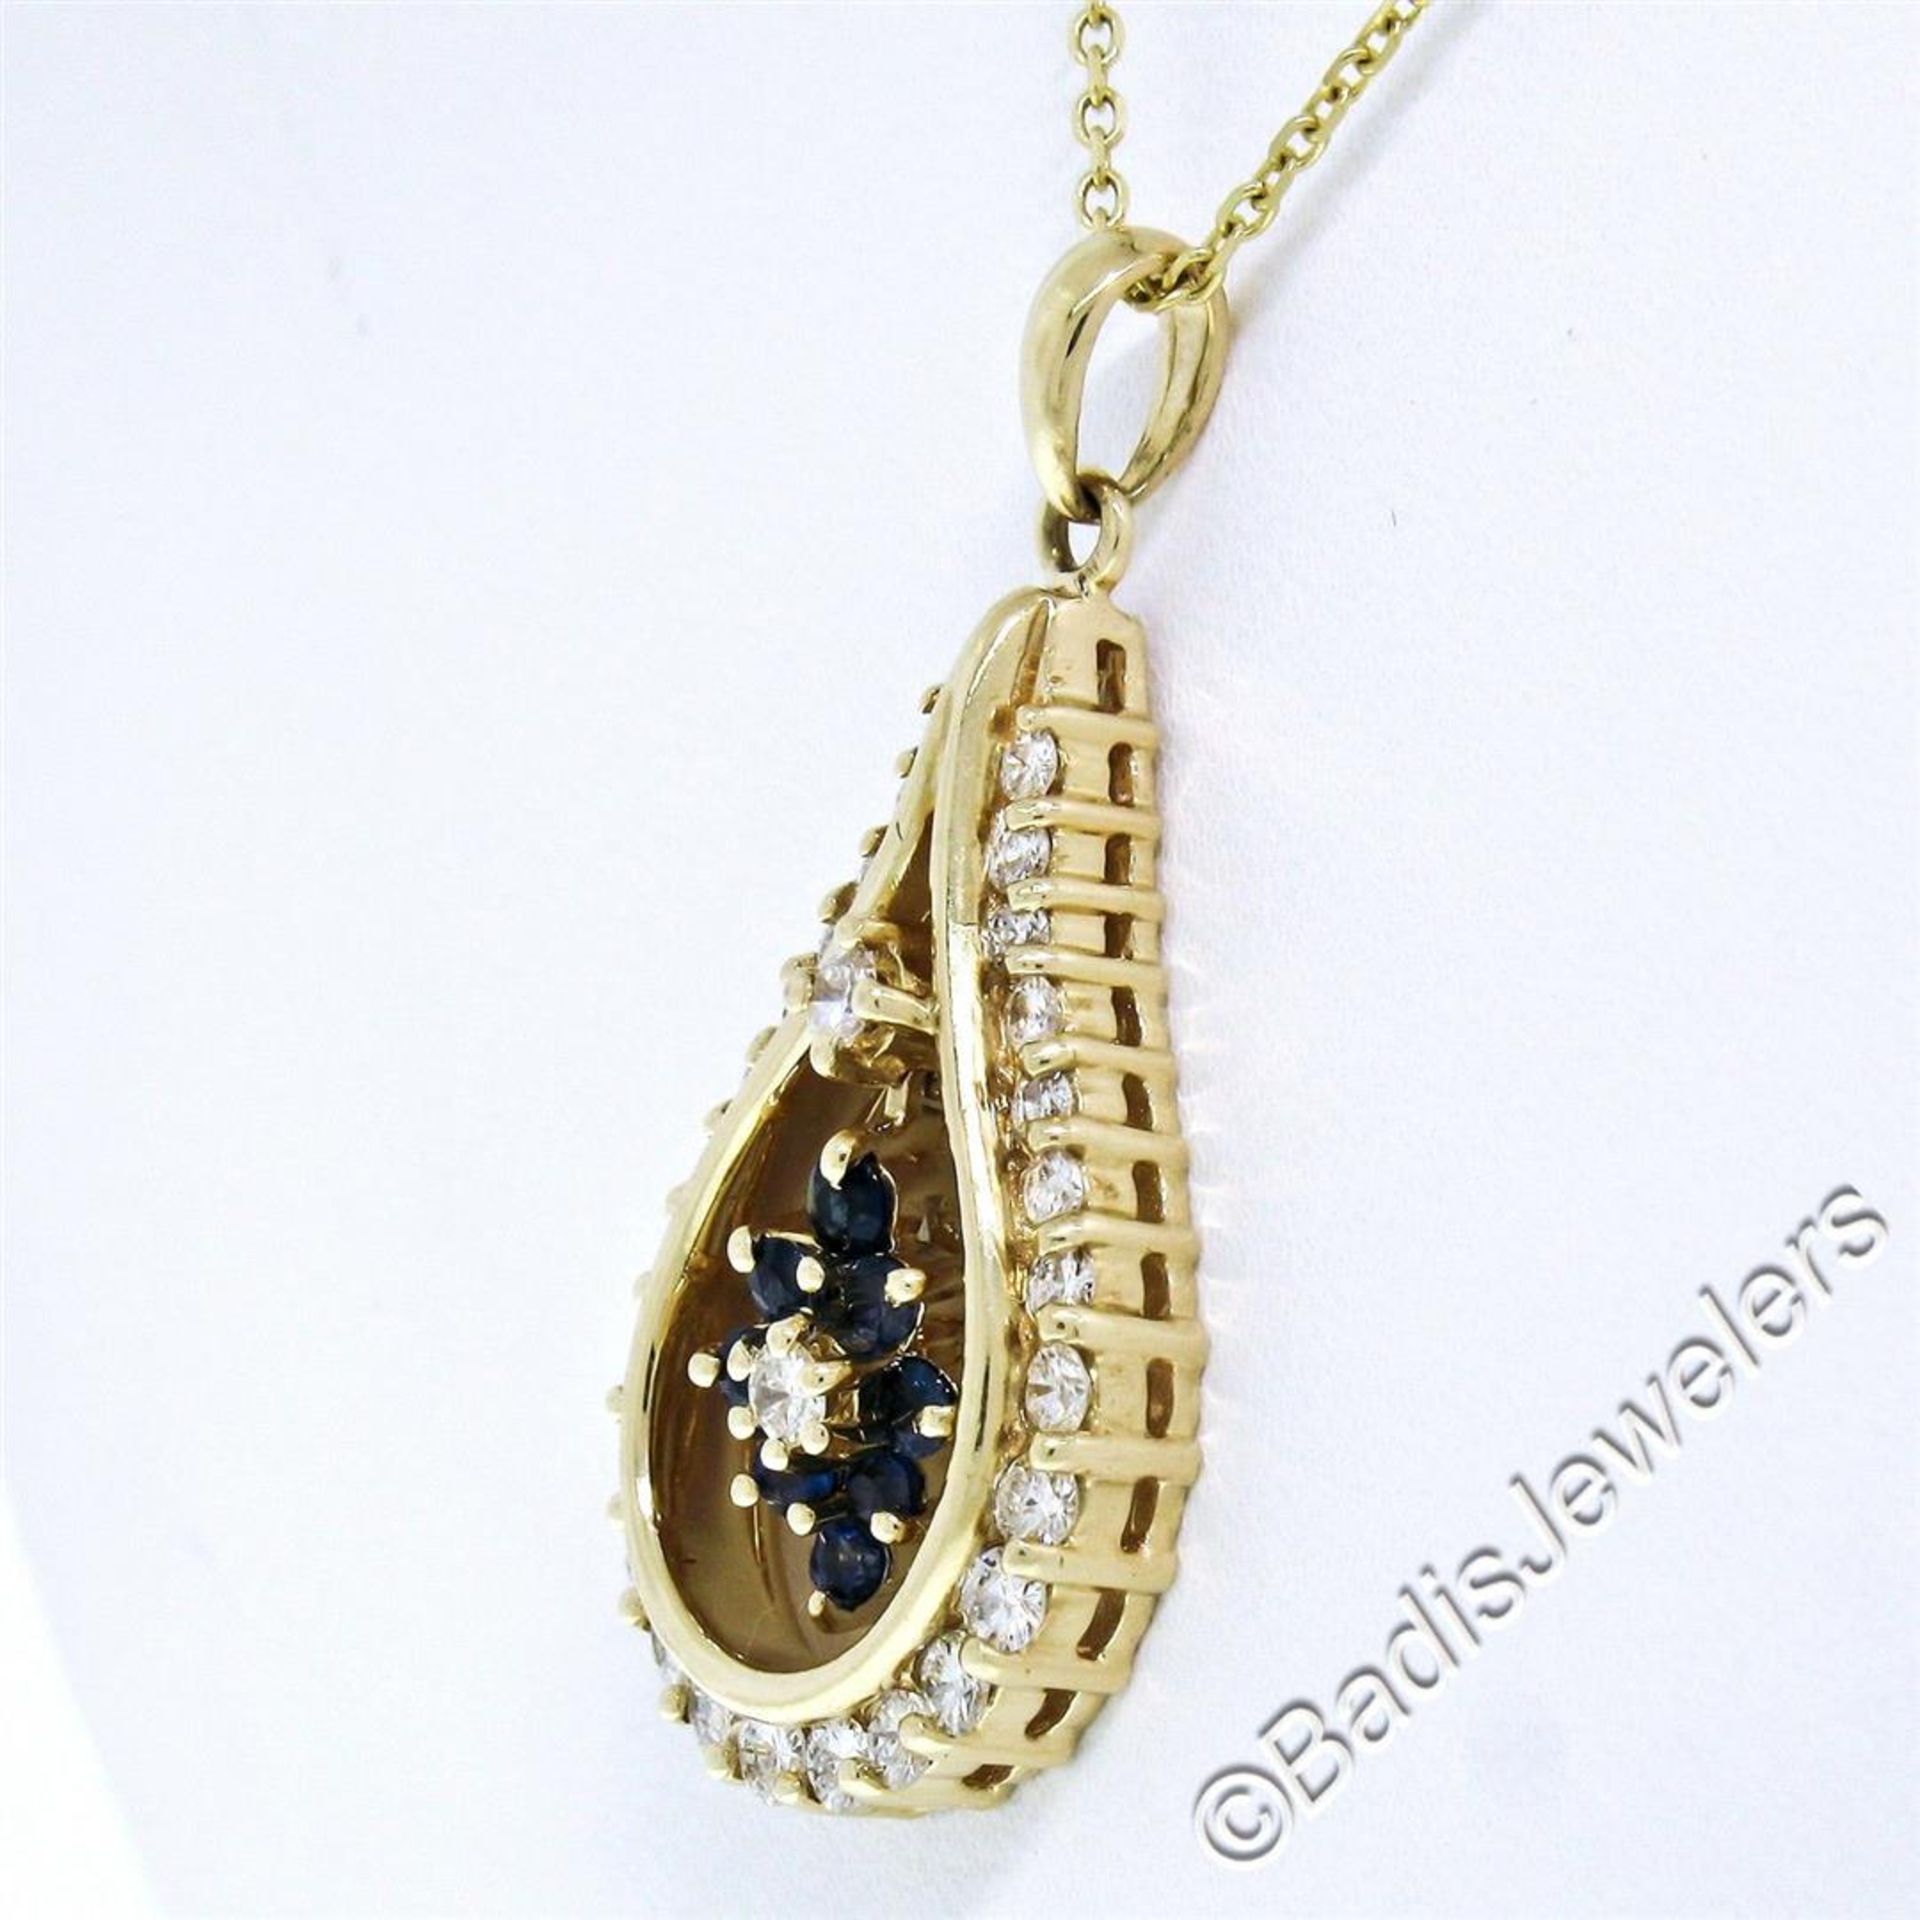 14kt Yellow Gold 1.22ctw Diamond and Sapphire Tear Drop Dangle Pendant Necklace - Image 4 of 7